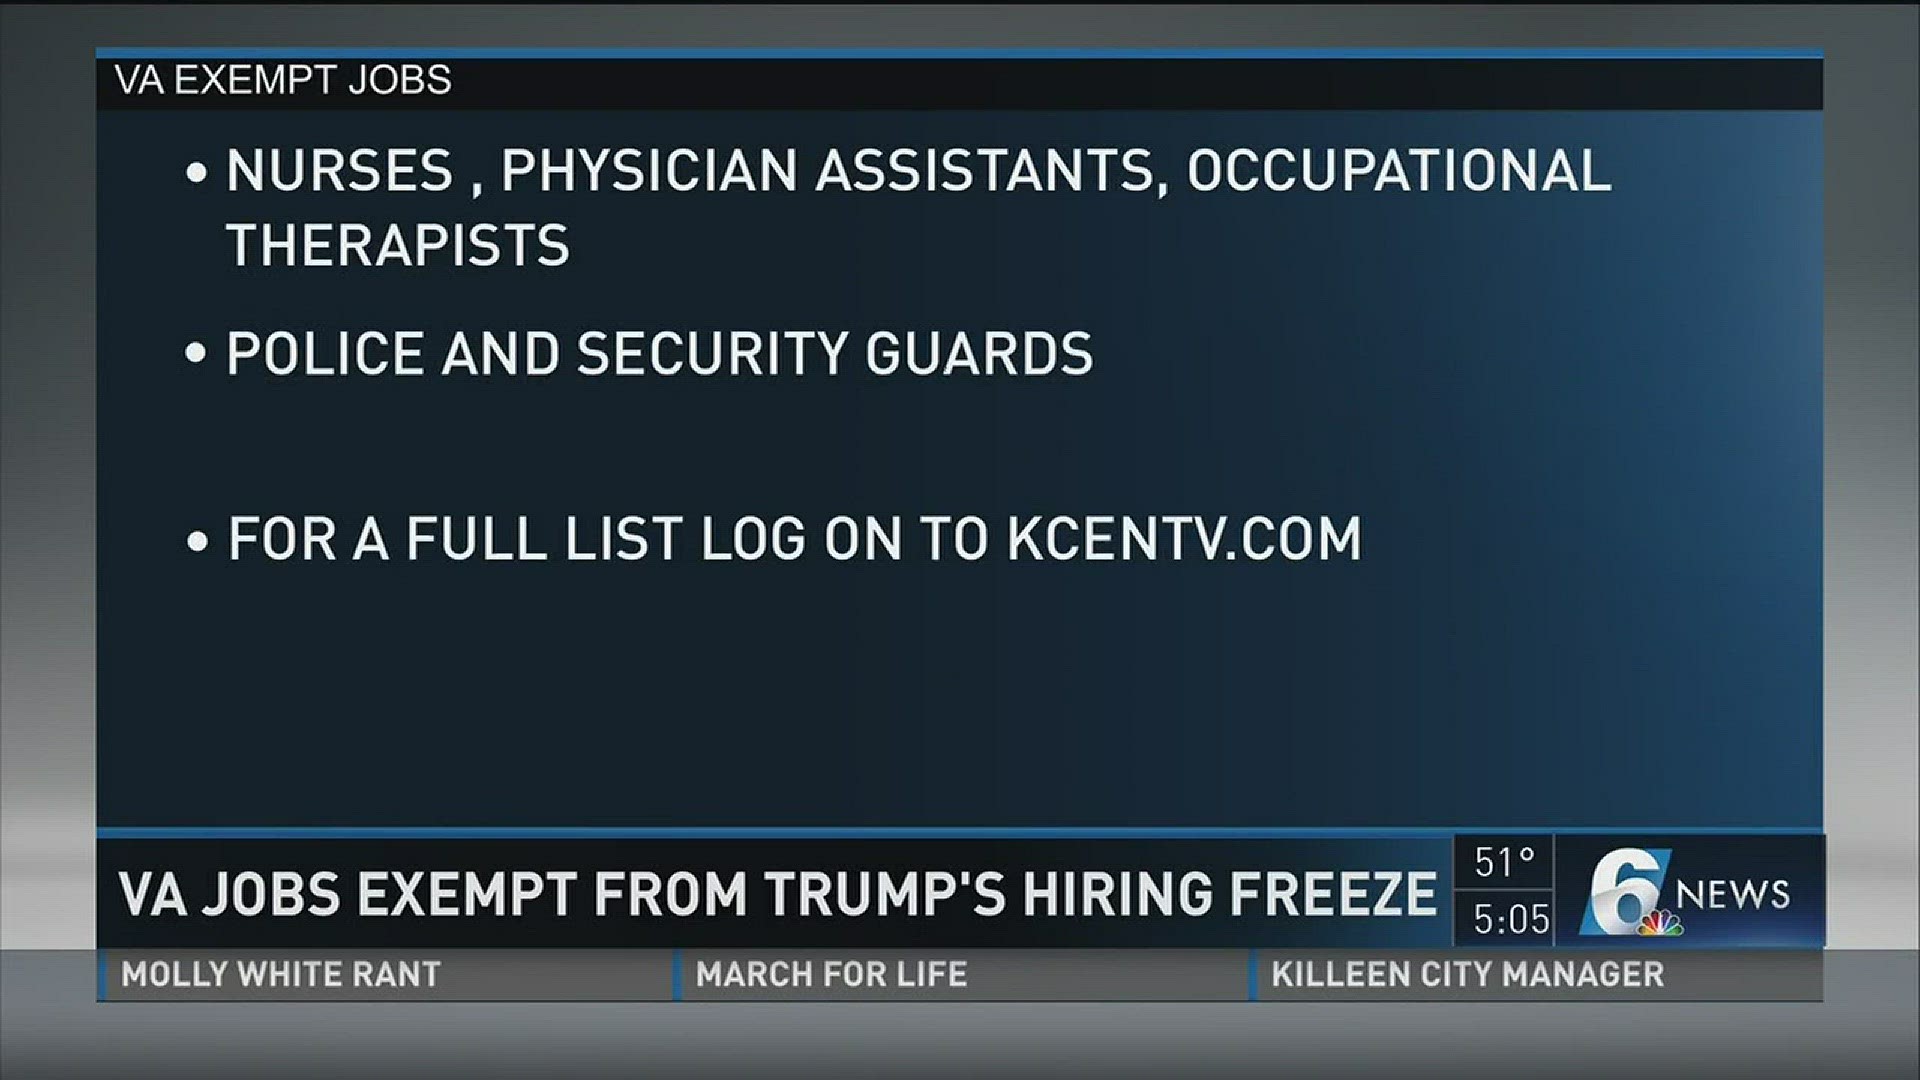 The Department of Veterans Affairs released a full list of jobs exempt from President Trump's federal hiring freeze.